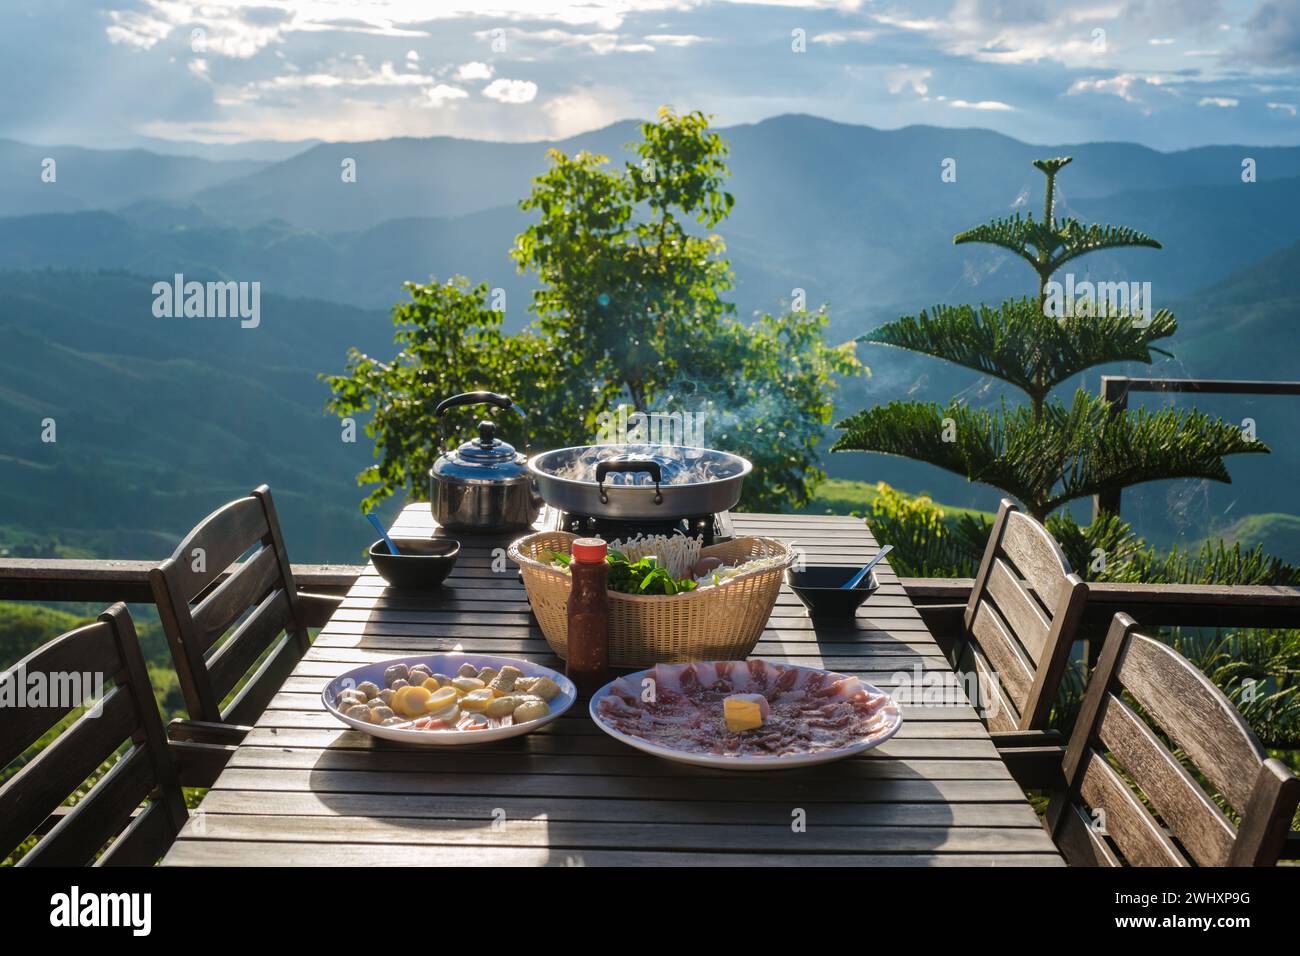 Dinner with a Thai BBQ at sunset in the mountains of Thailand Stock Photo